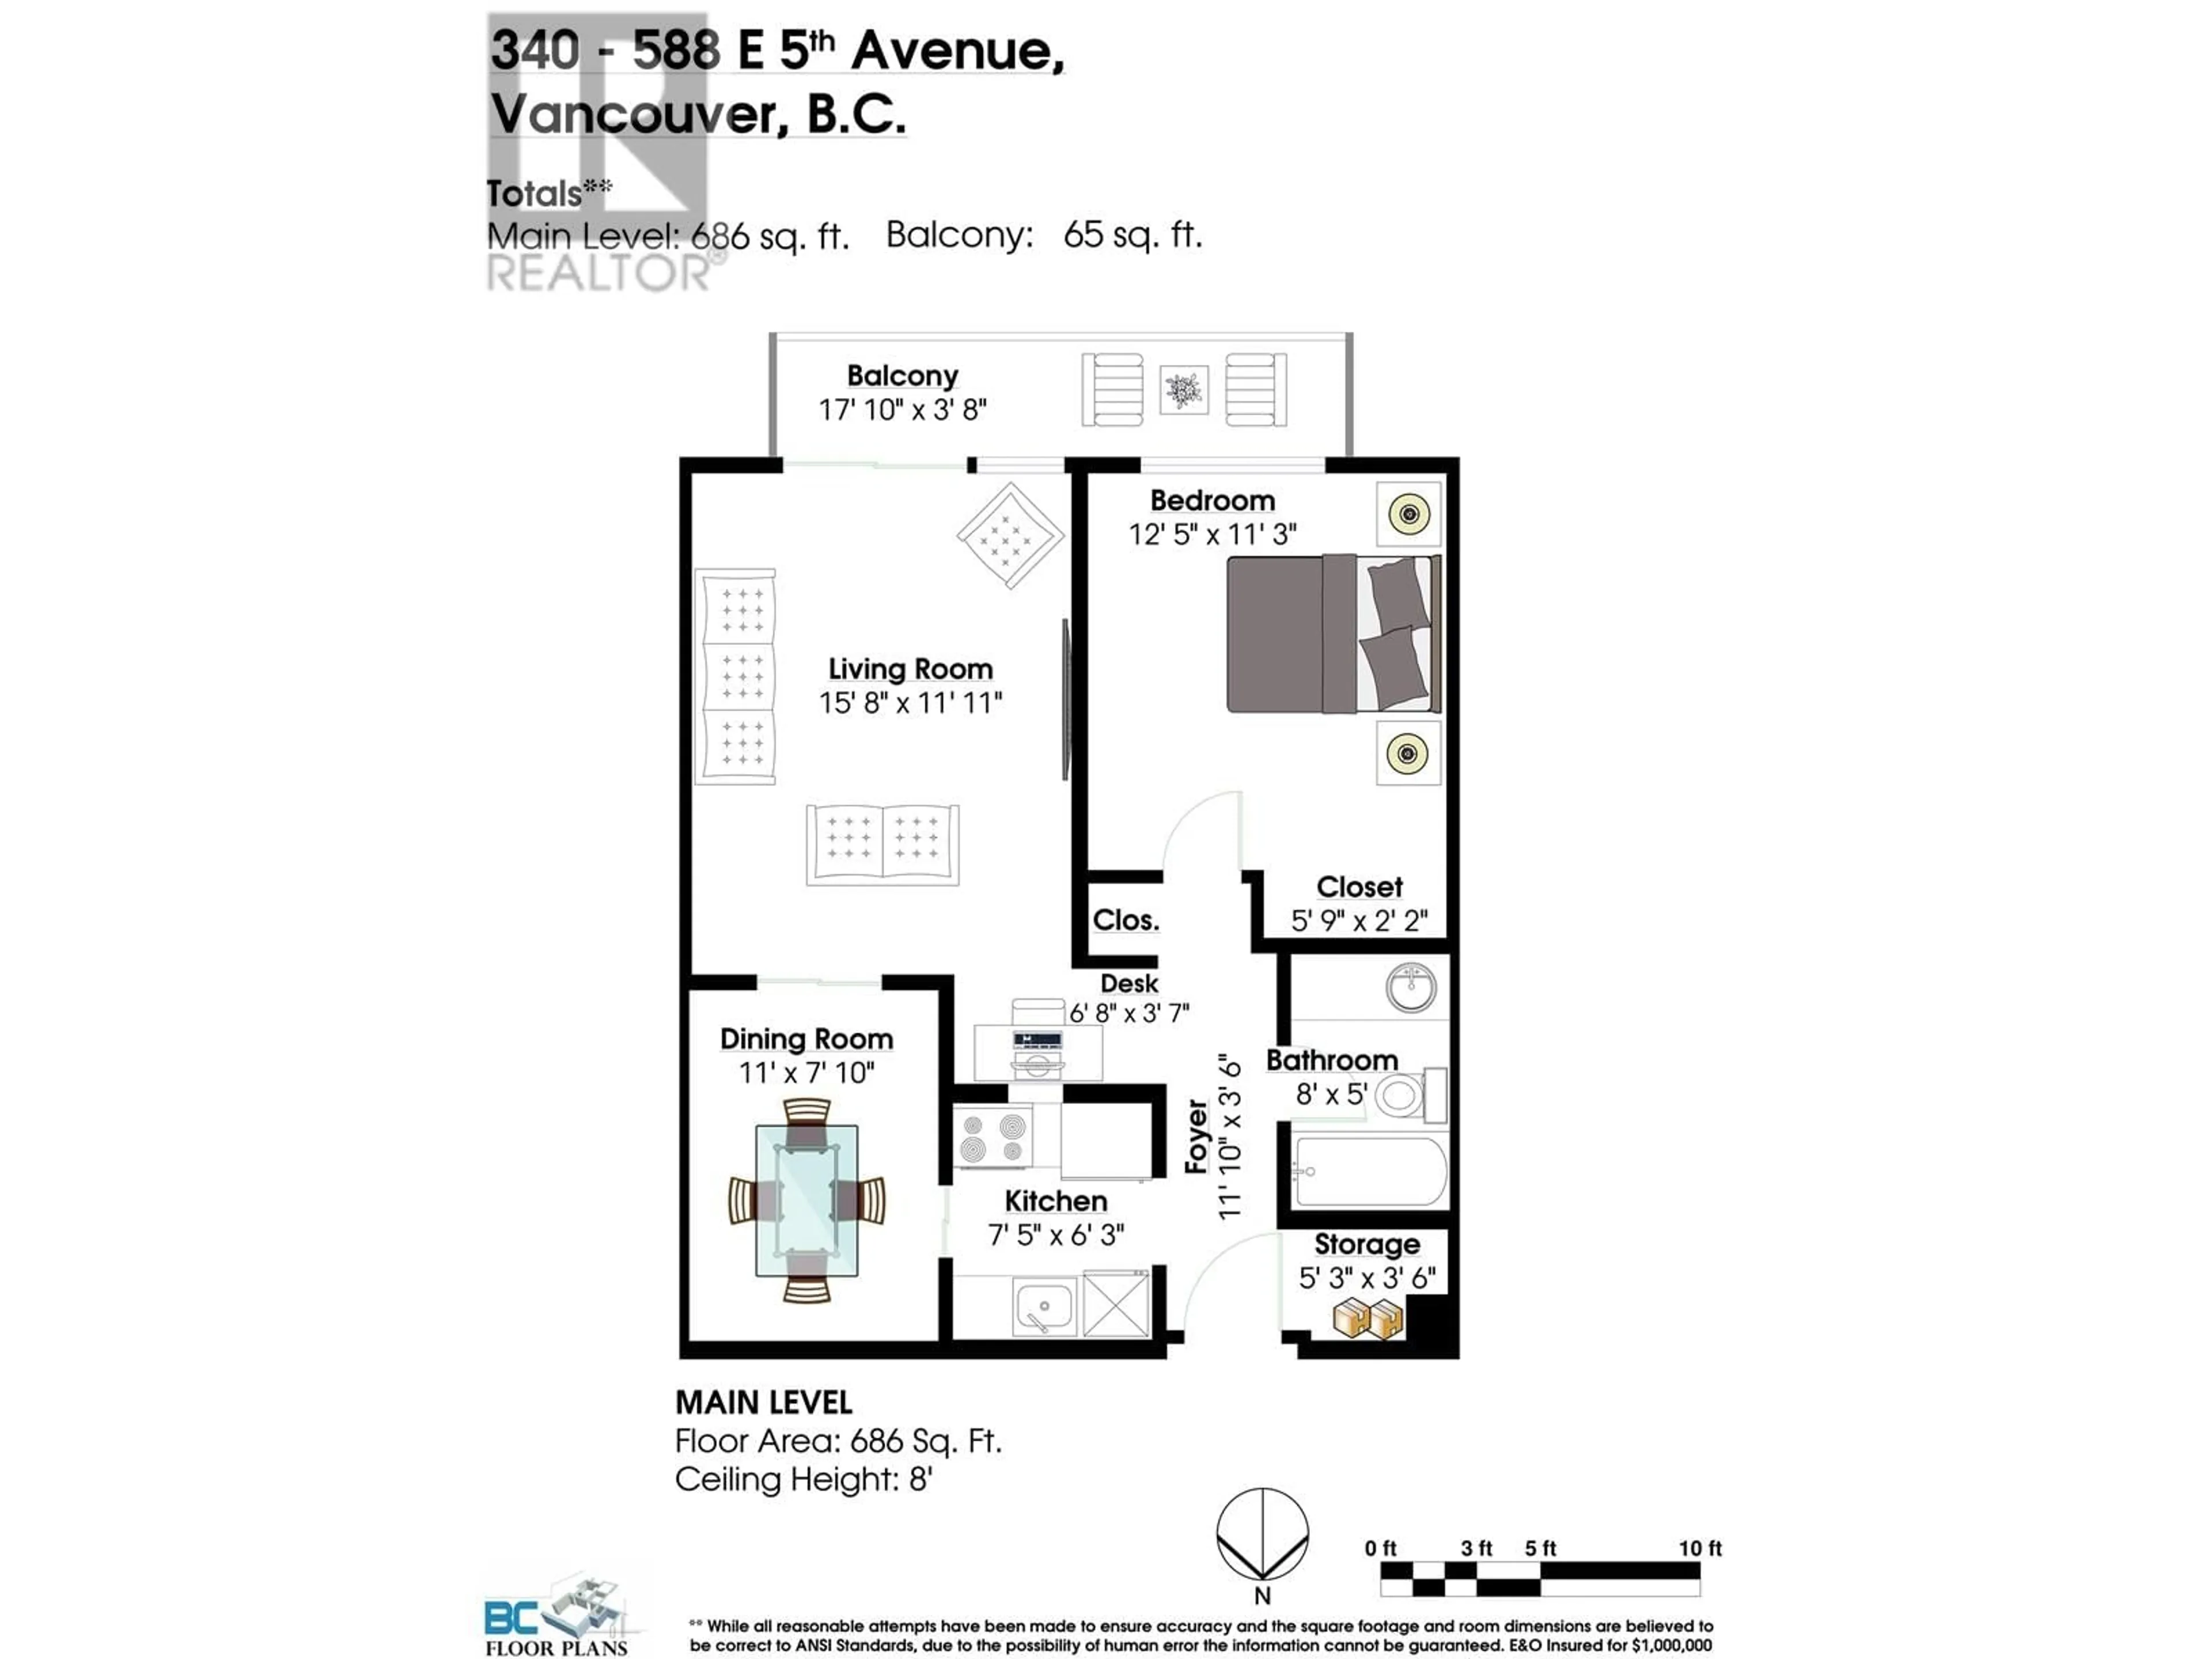 Floor plan for 340 588 E 5TH AVENUE, Vancouver British Columbia V5T4H6